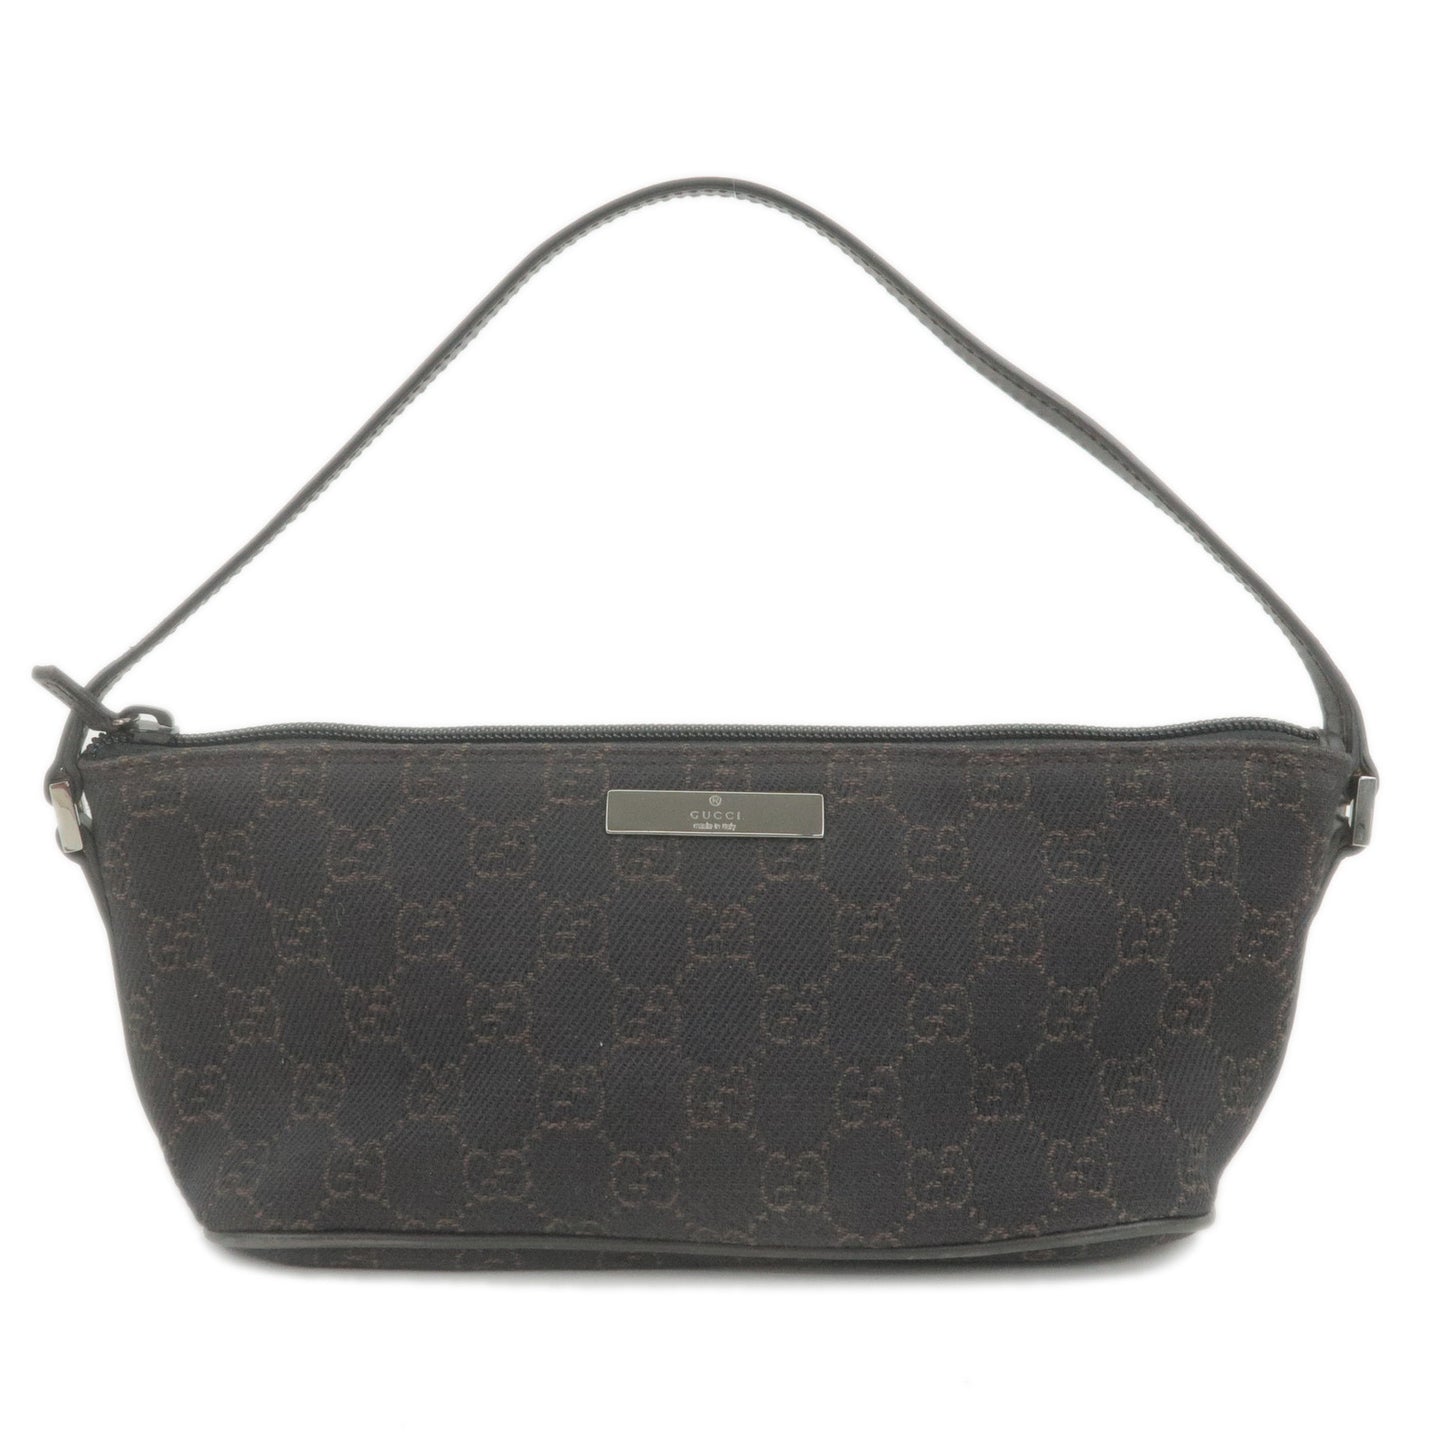 GUCCI-GG-Canvas-Leather-Boat-Bag-Hand-Bag-Dark-Brown-07198